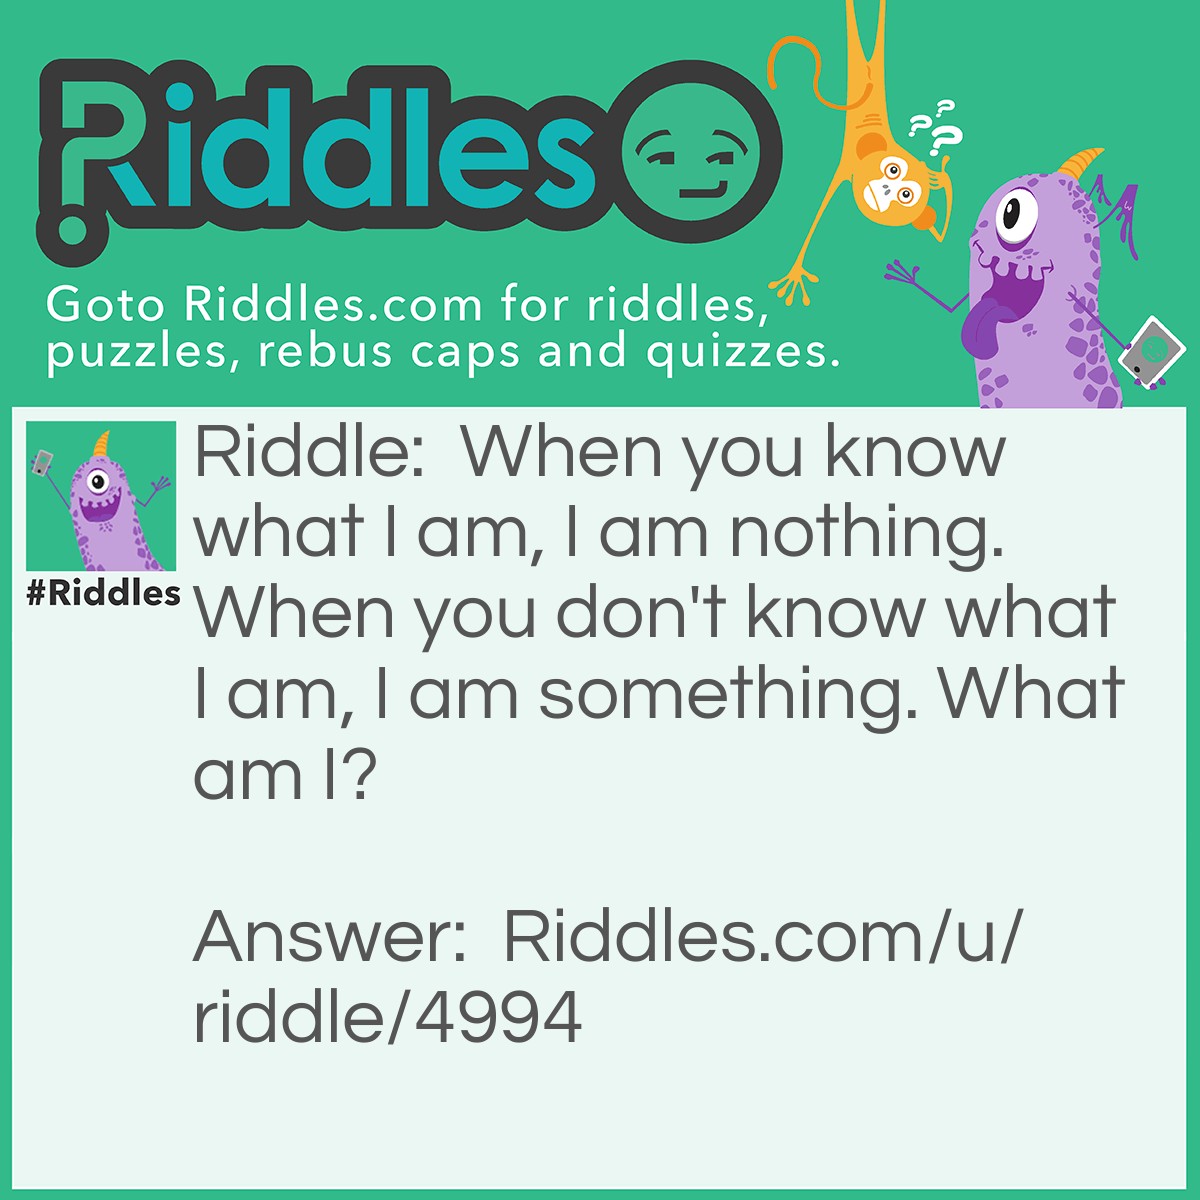 Riddle: When you know what I am, I am nothing. When you don't know what I am, I am something. What am I? Answer: A riddle.